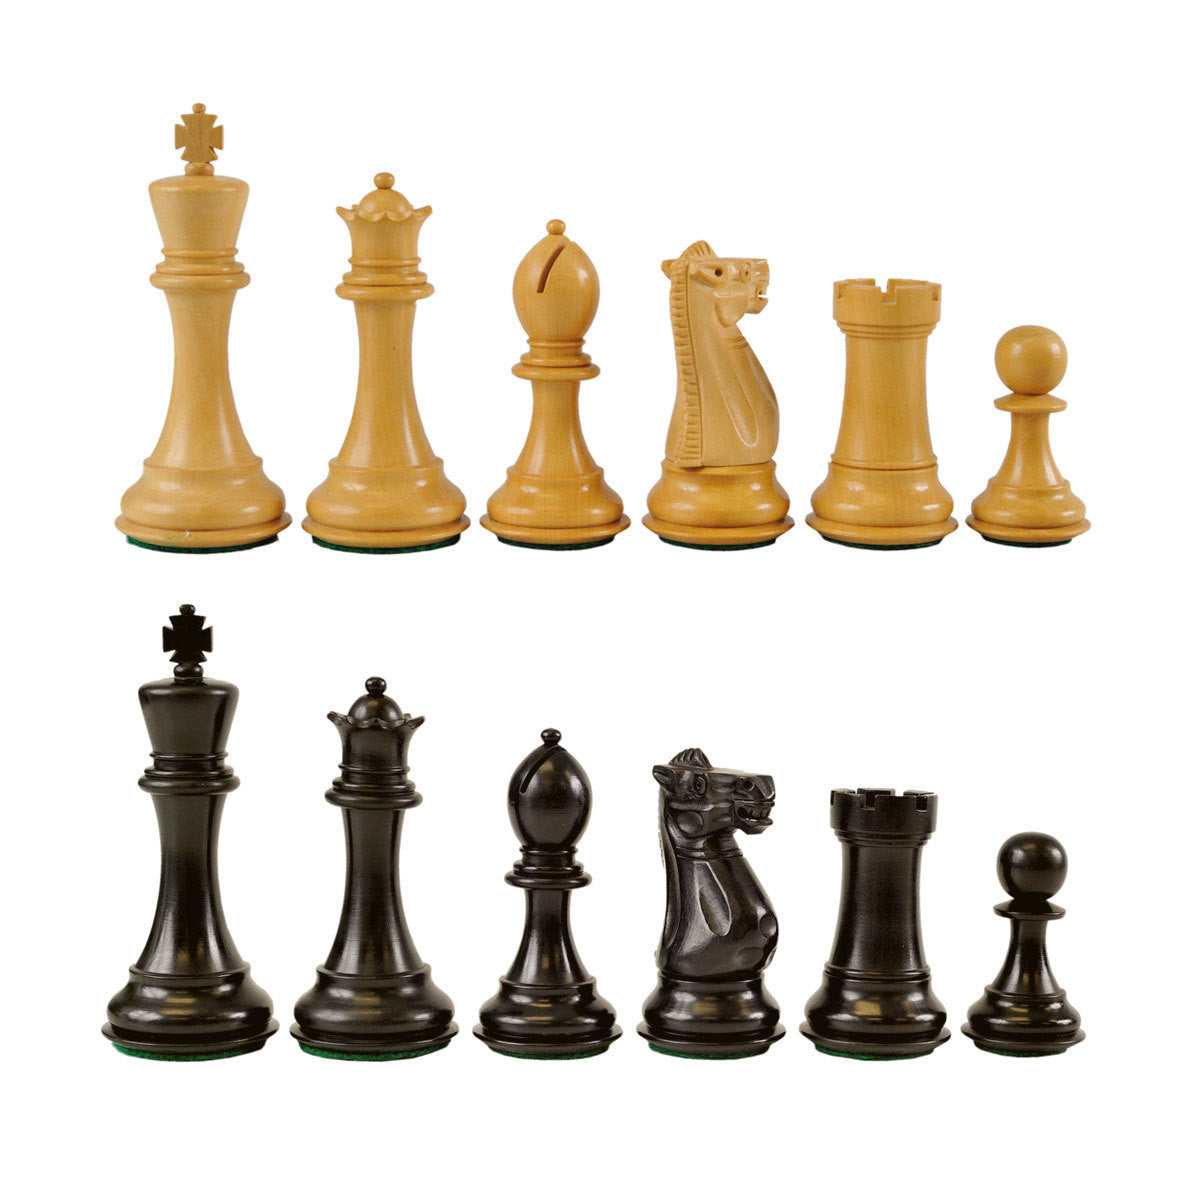 St. Petersburg Wooden Chess Pieces